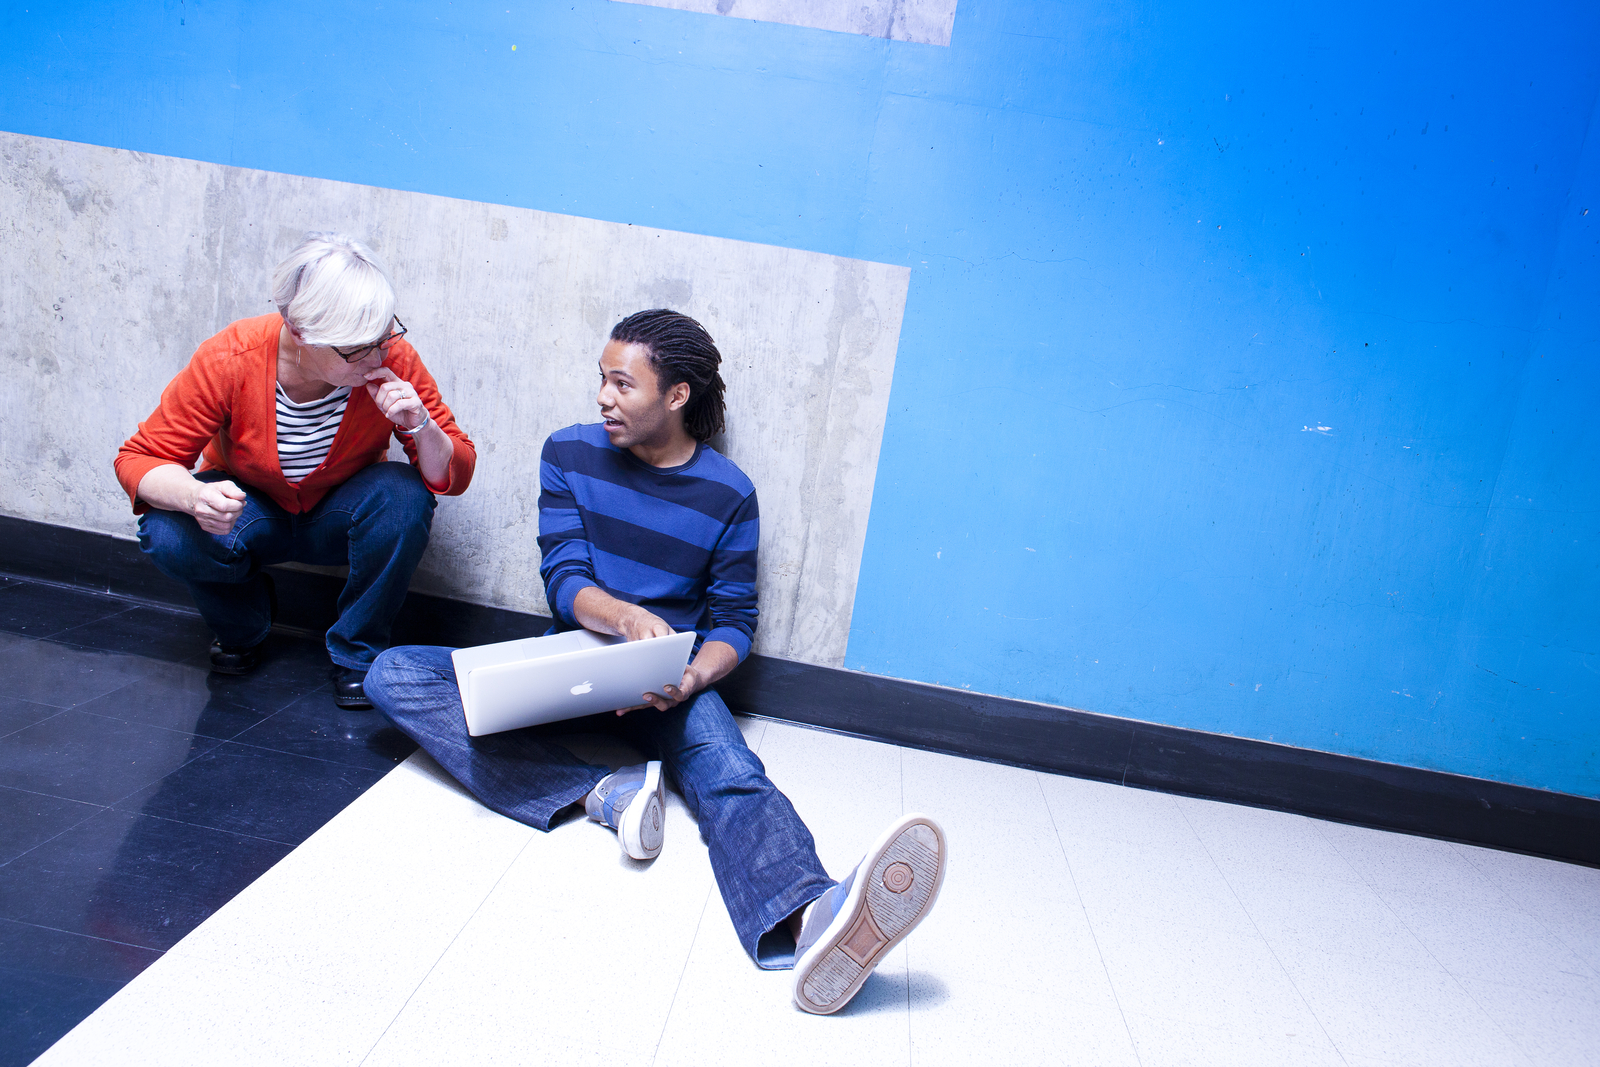 A female professor crouches next to a male student, who's sitting with his legs stretched out in a hallway with a blue wall, pointing to something on a Mac laptop screen